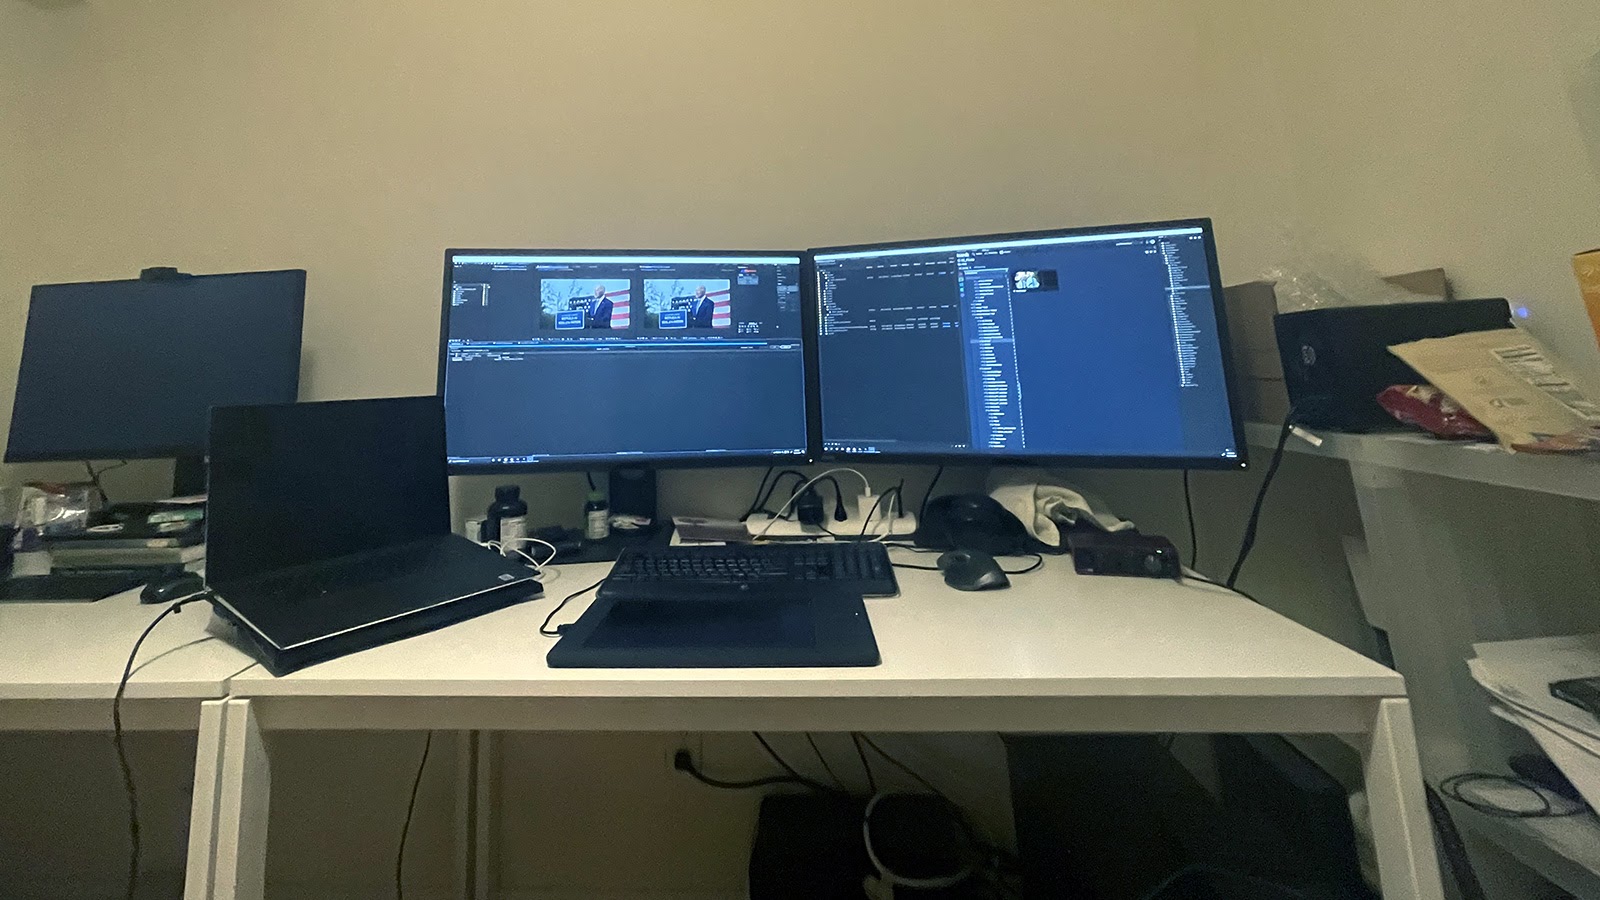 Rough and ready video editing station